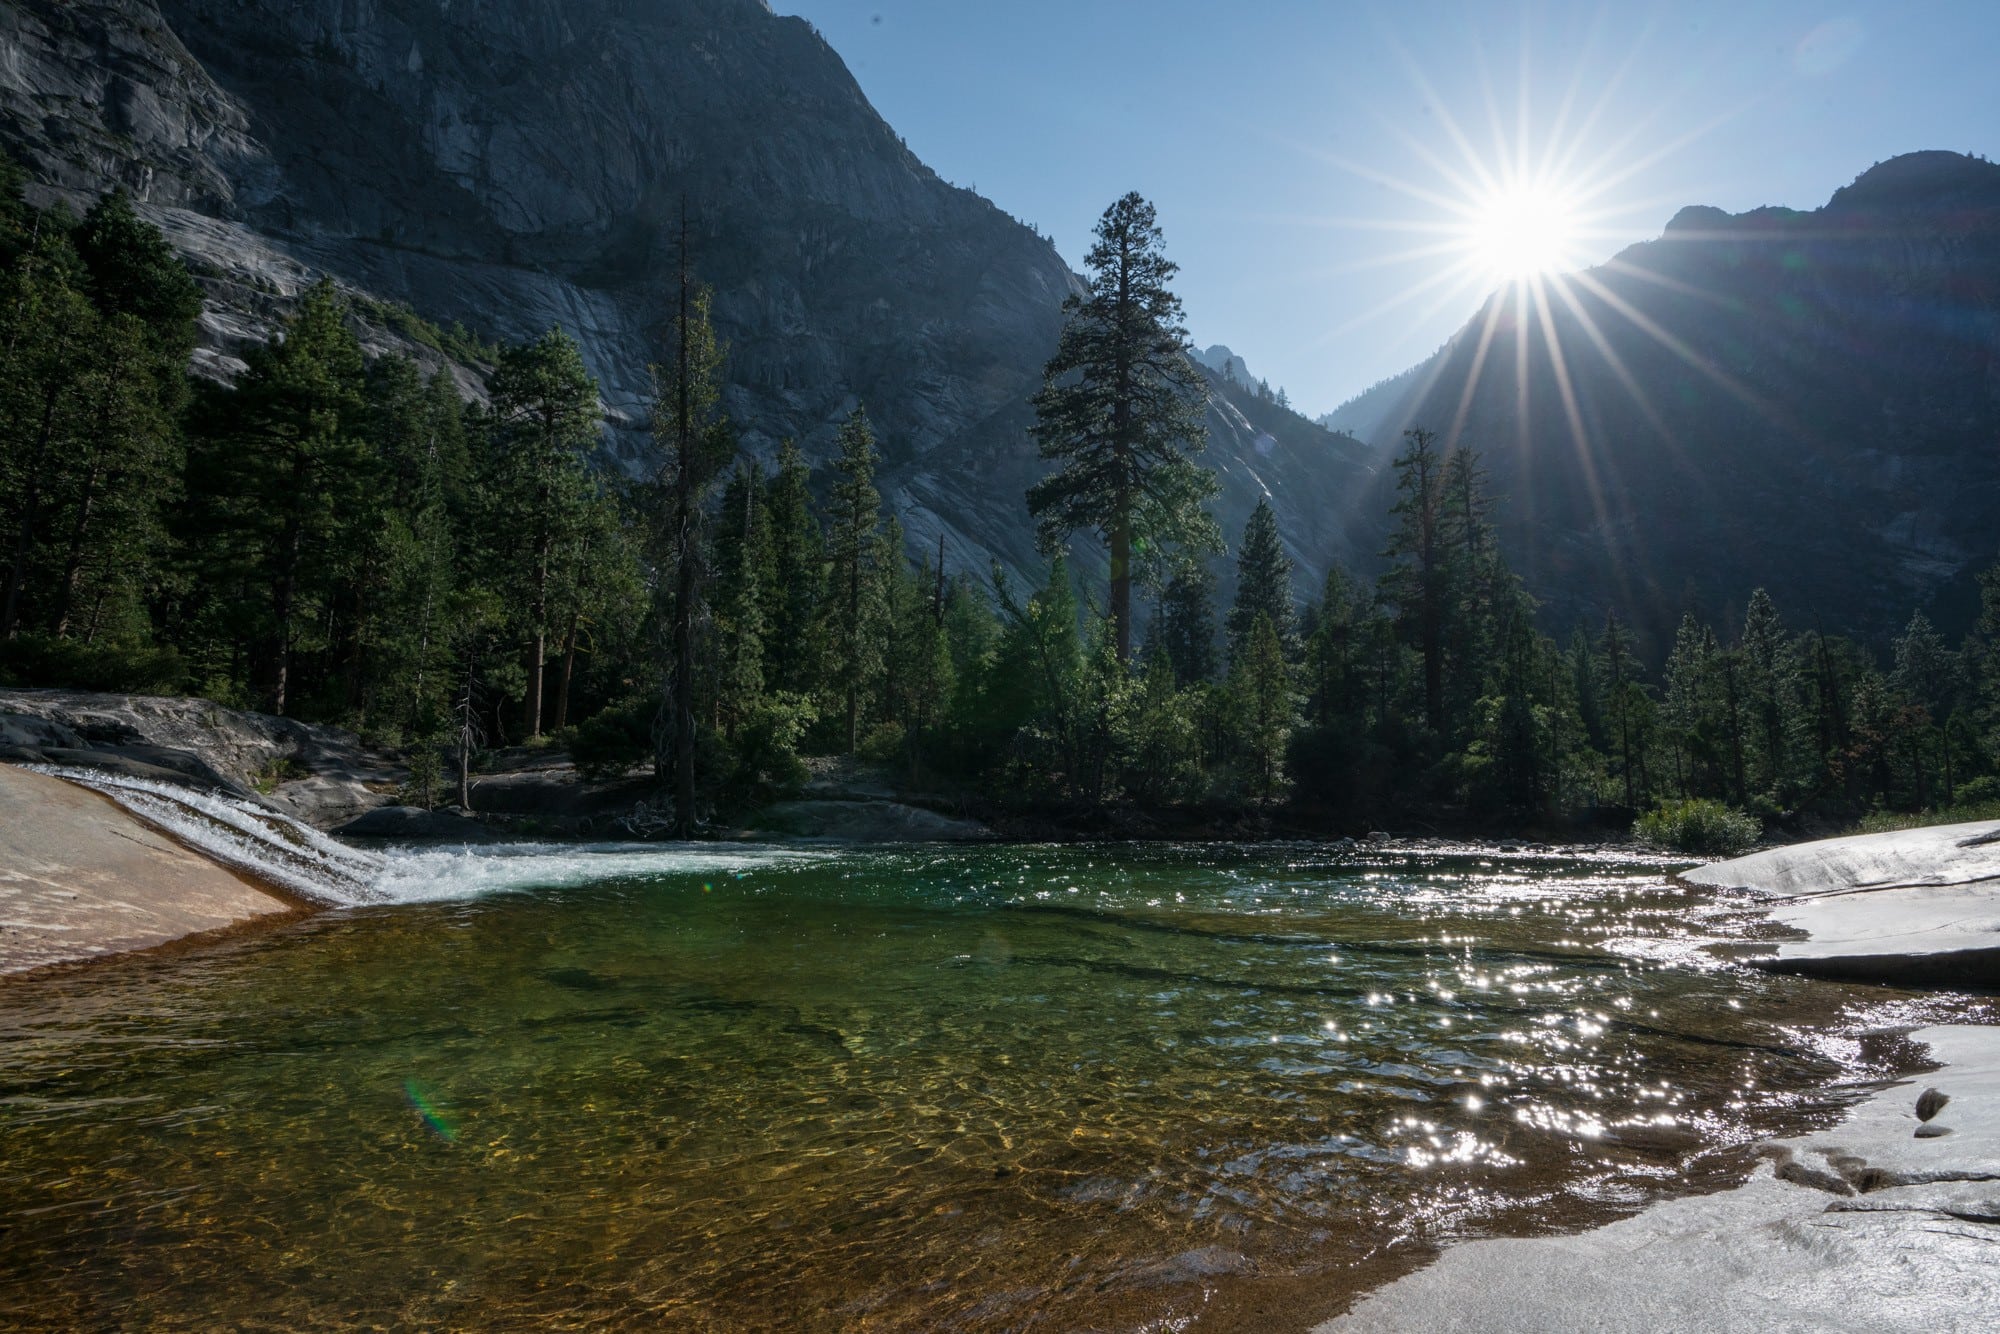 Plan an epic Yosemite backpacking trip through the Grand Canyon of the Tuolumne with our trail guide containing info on permits, transportation & more.